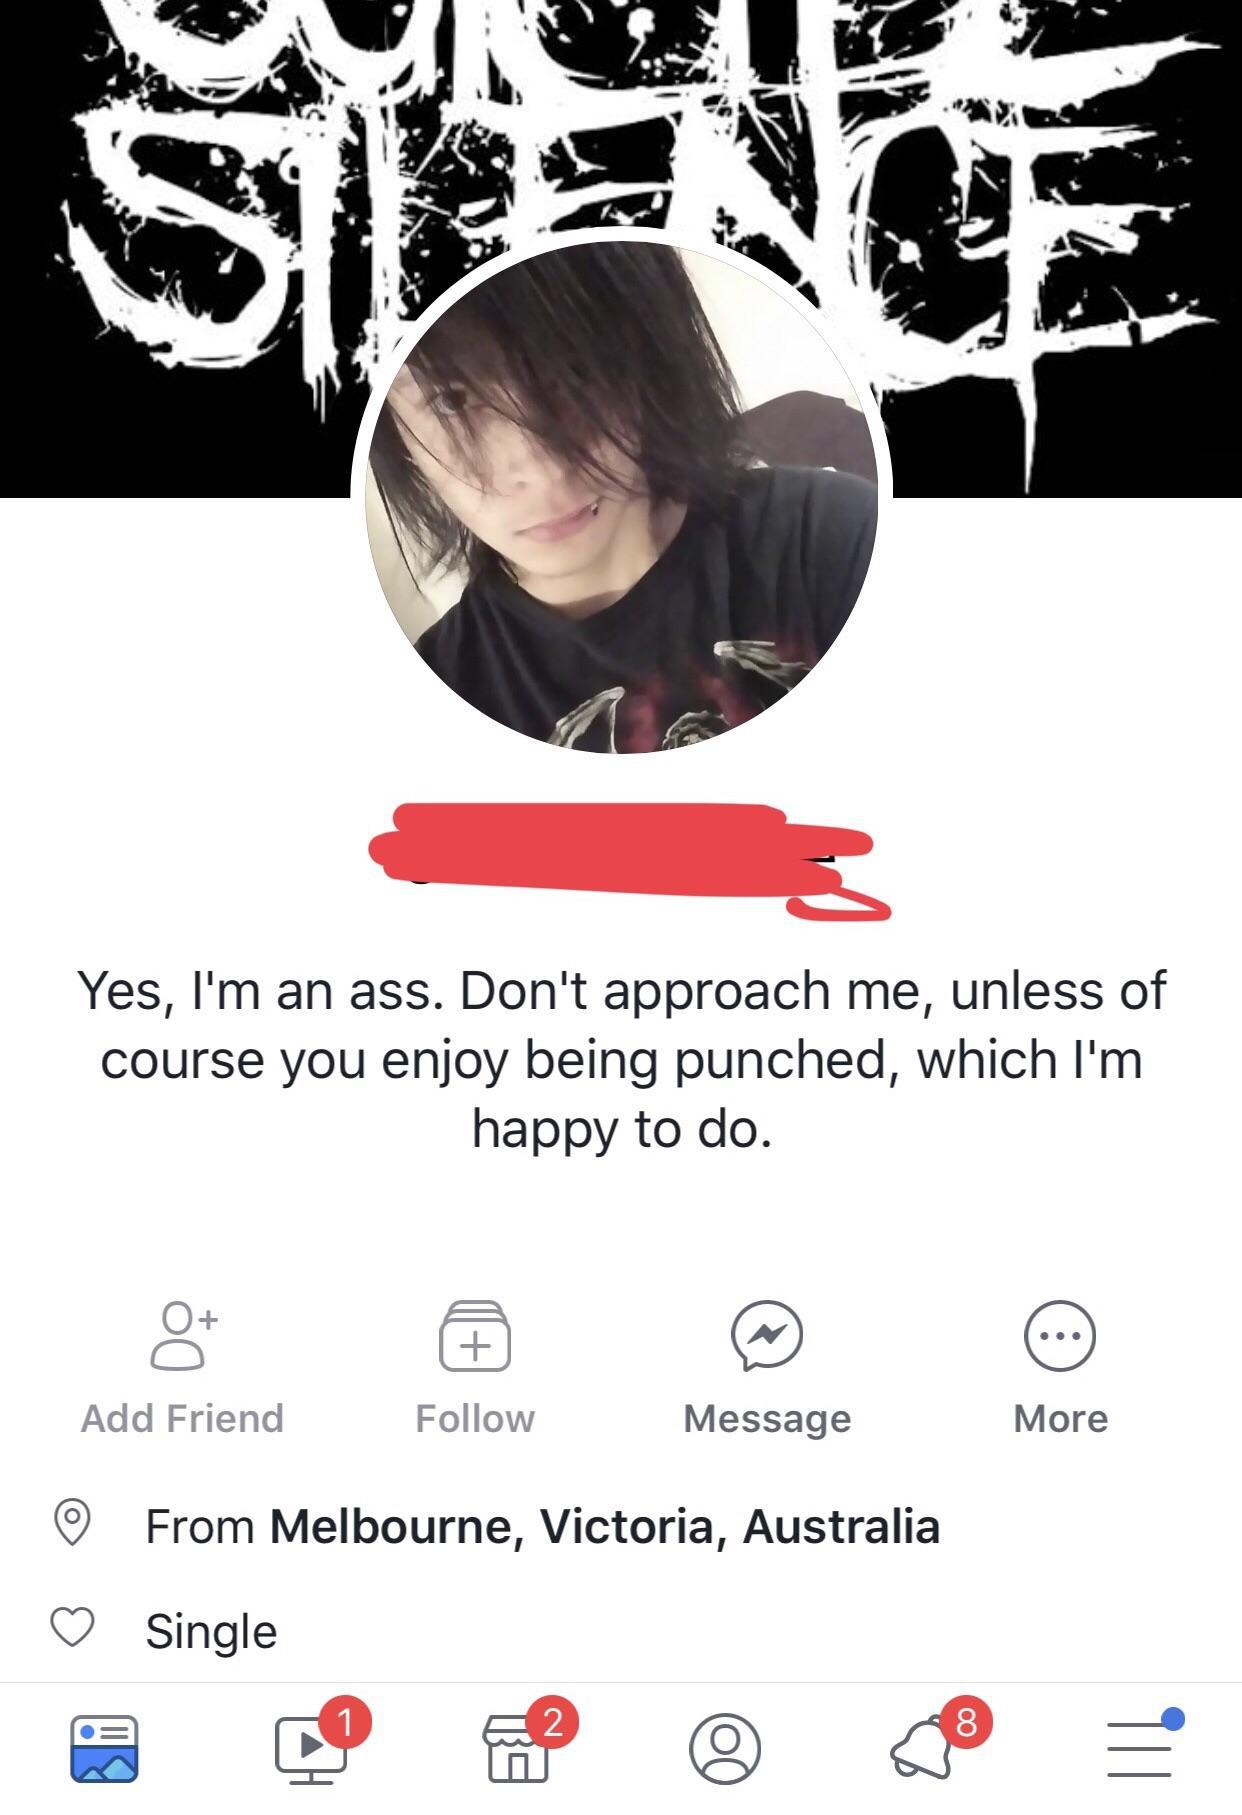 suicide silence - . Yes, I'm an ass. Don't approach me, unless of course you enjoy being punched, which I'm happy to do. Add Friend Message More From Melbourne, Victoria, Australia Single 00